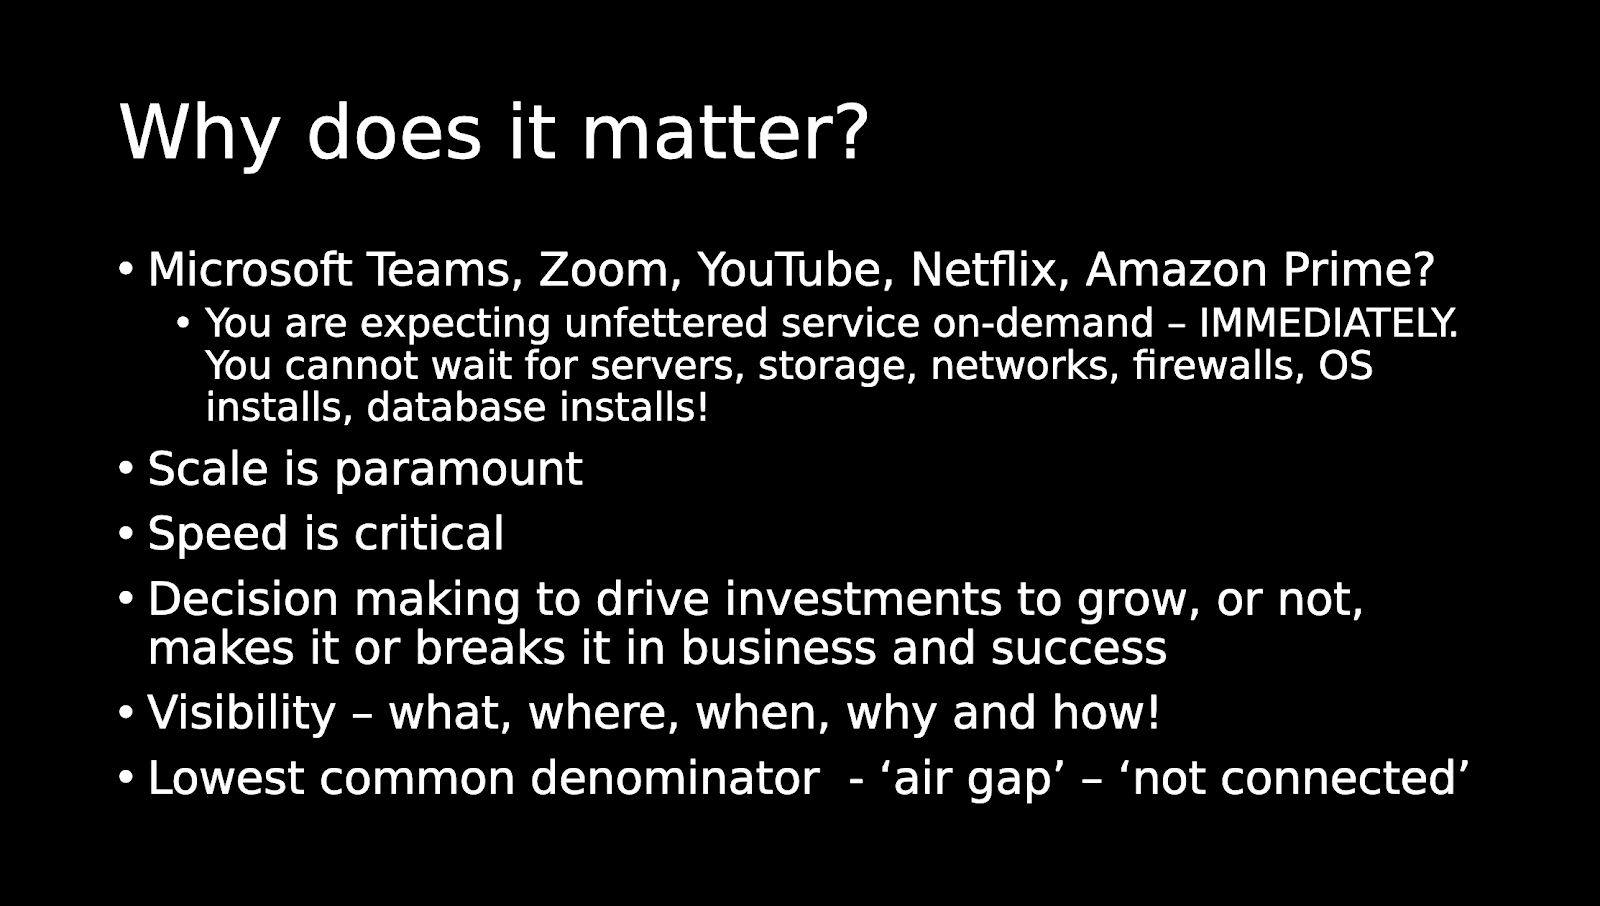 Why does it matter? slide